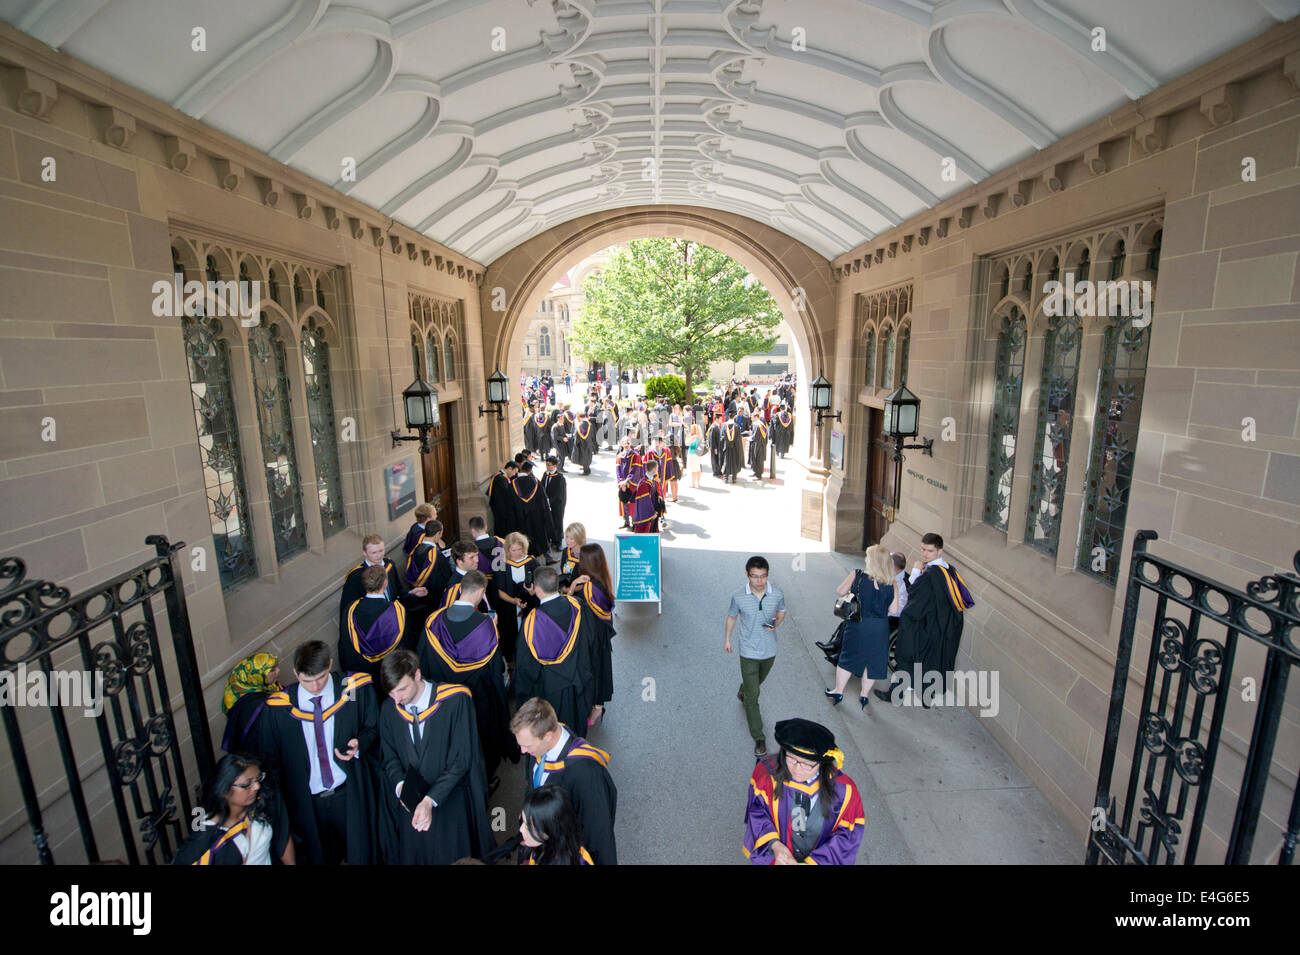 Manchester, UK. 10th July, 2014. Students at The University of Manchester attend their graduation ceremony, along with watching friends and family Credit:  Campus Shots/Alamy Live News. (Editorial use only) Stock Photo